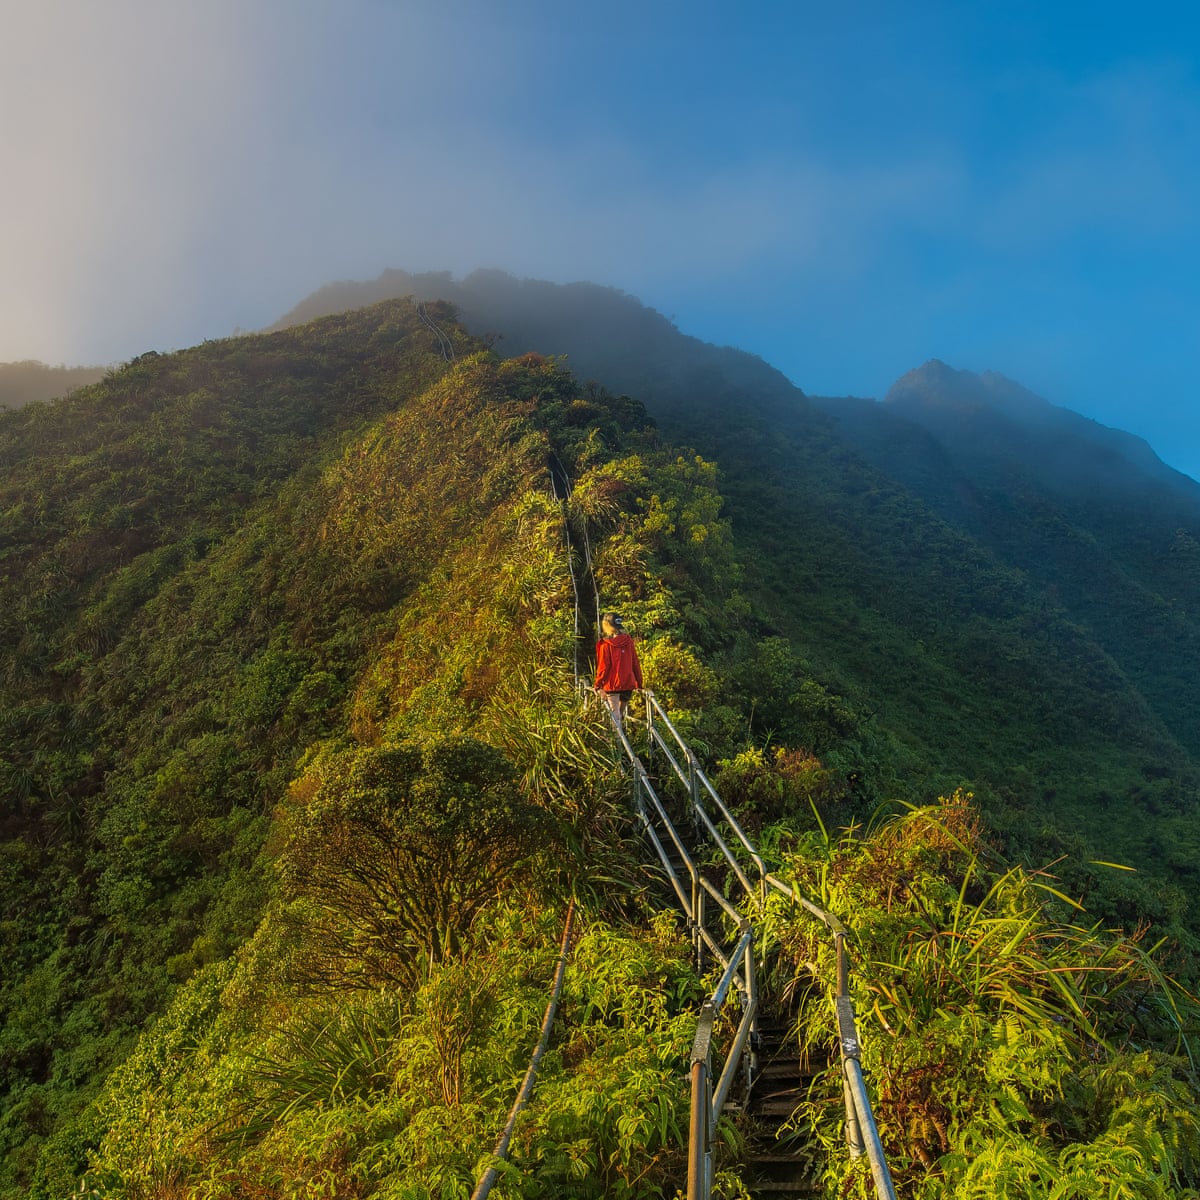 Hawaii to remove forbidden staircase due to 'rampant trespassing